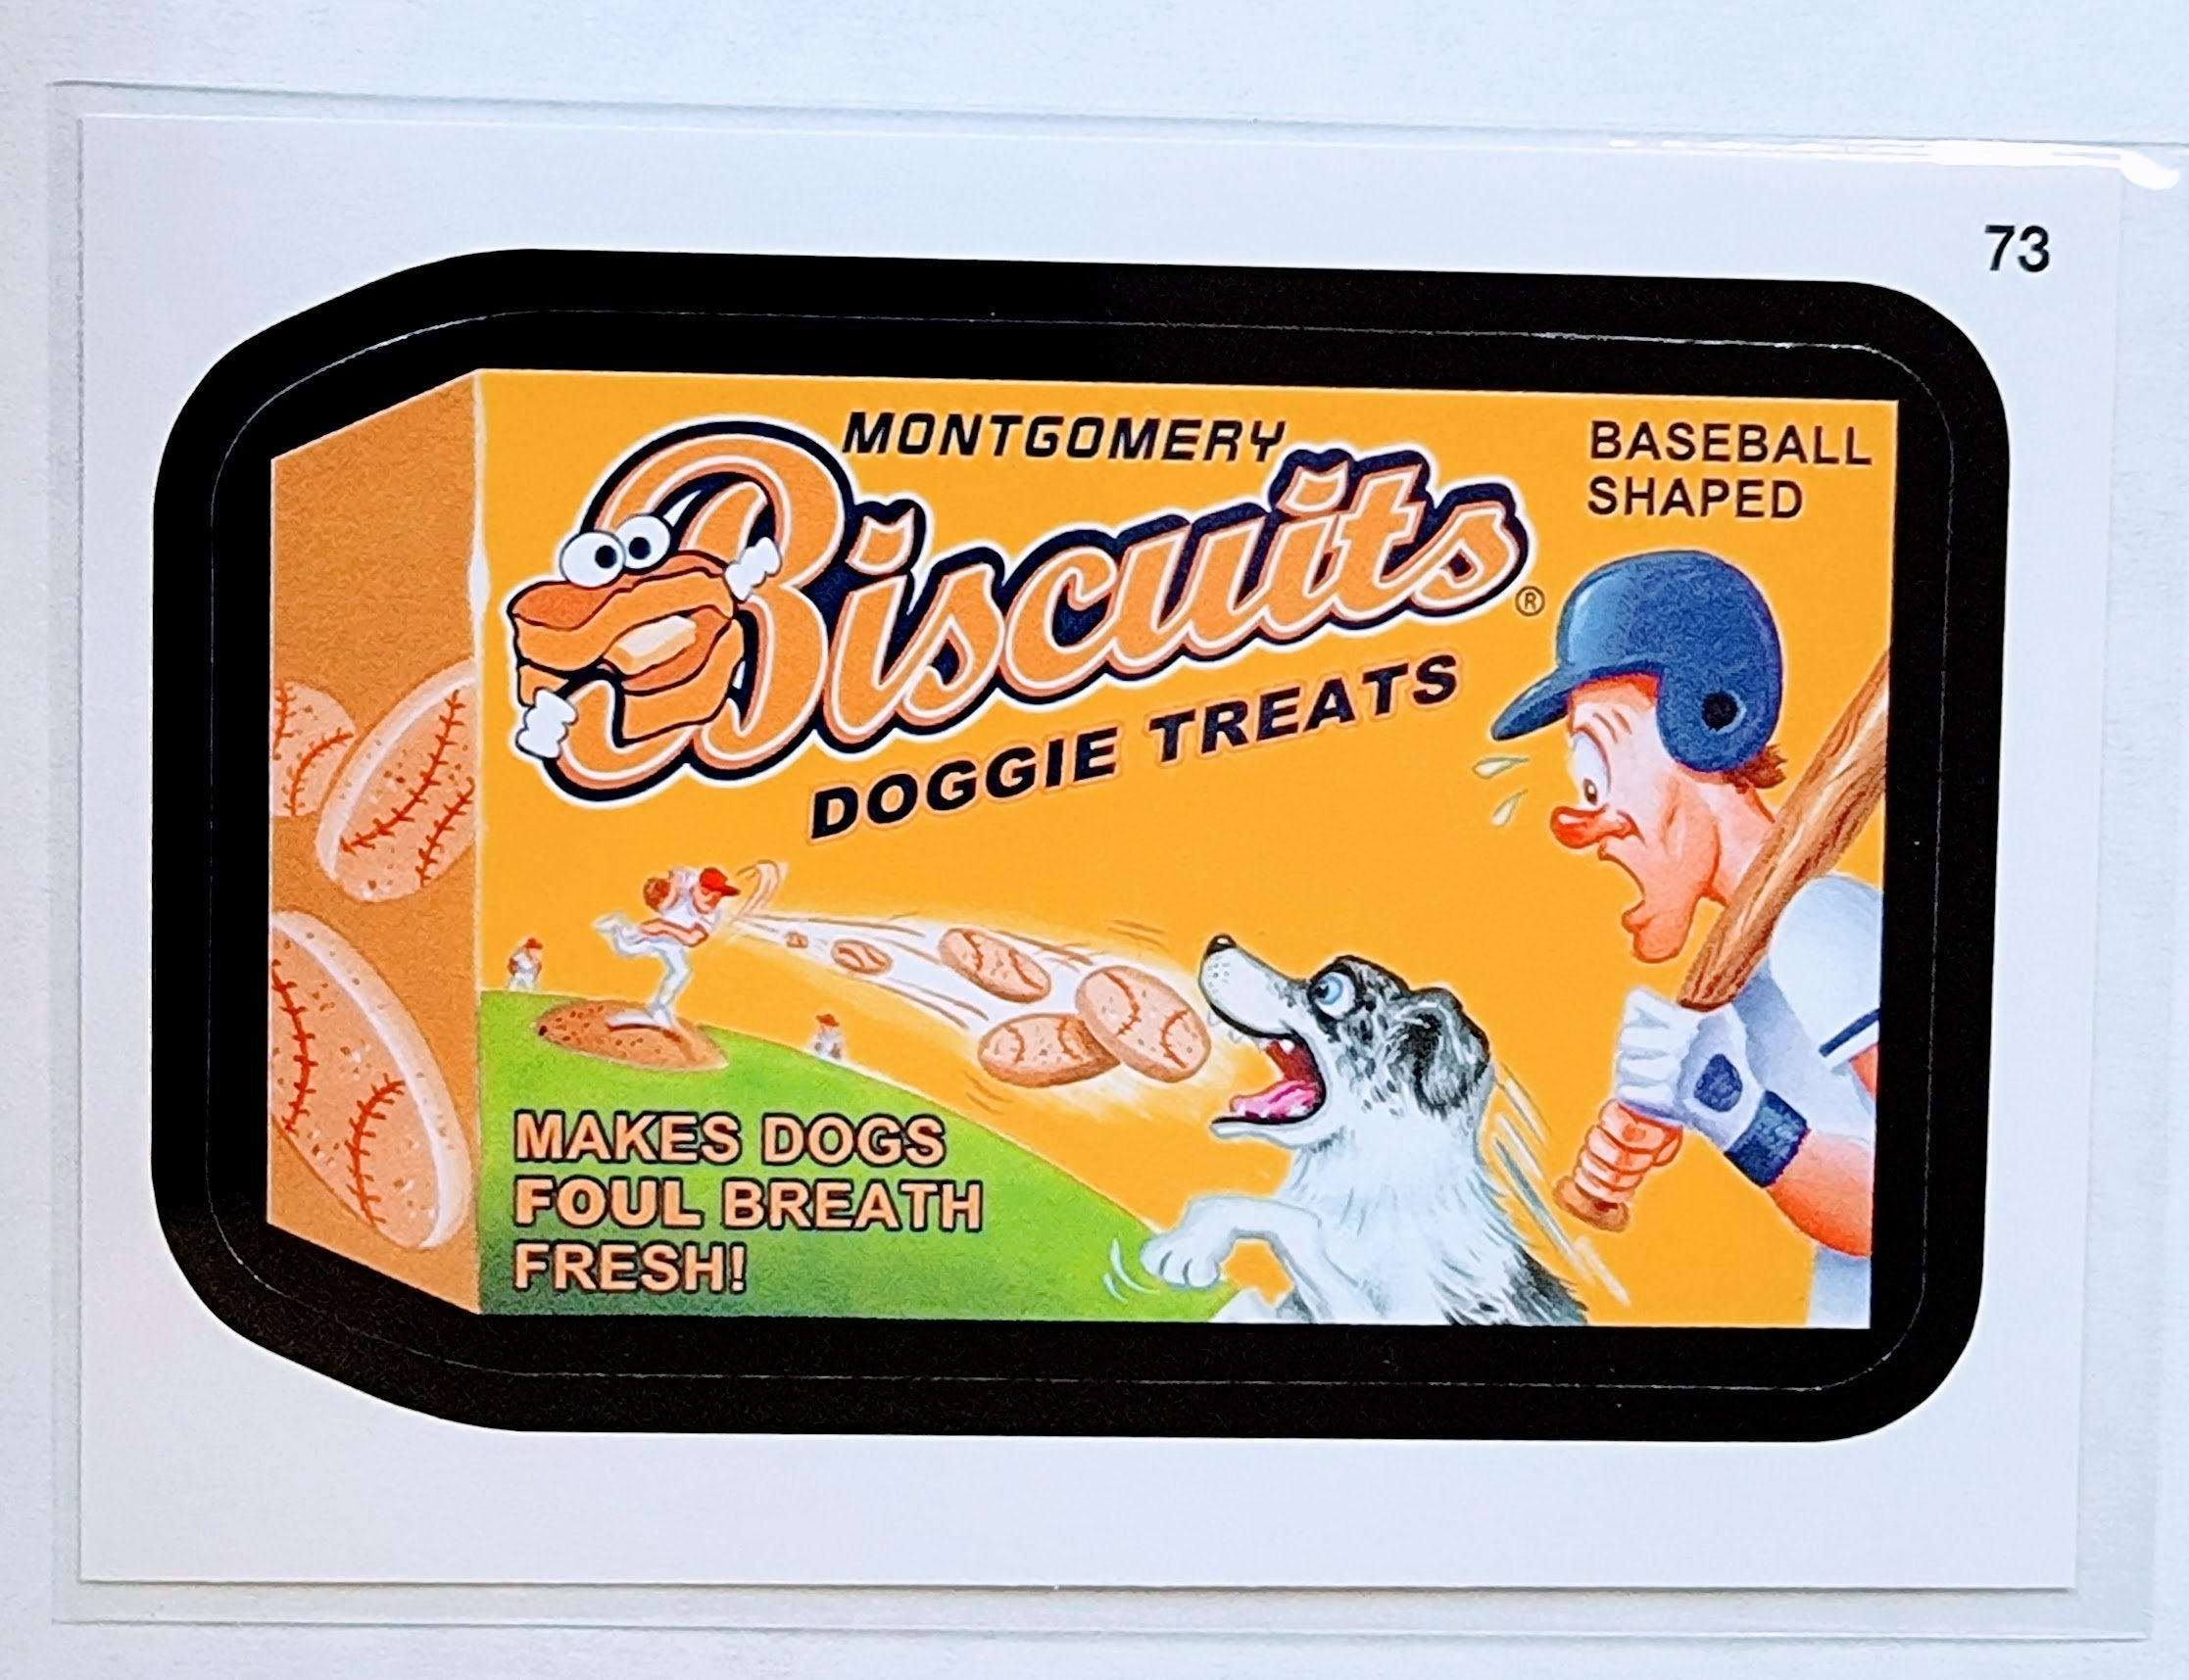 2016 Topps MLB Baseball Wacky Packages Montgomery Biscuits Doggie Treats Sticker Trading Card MCSC1 simple Xclusive Collectibles   